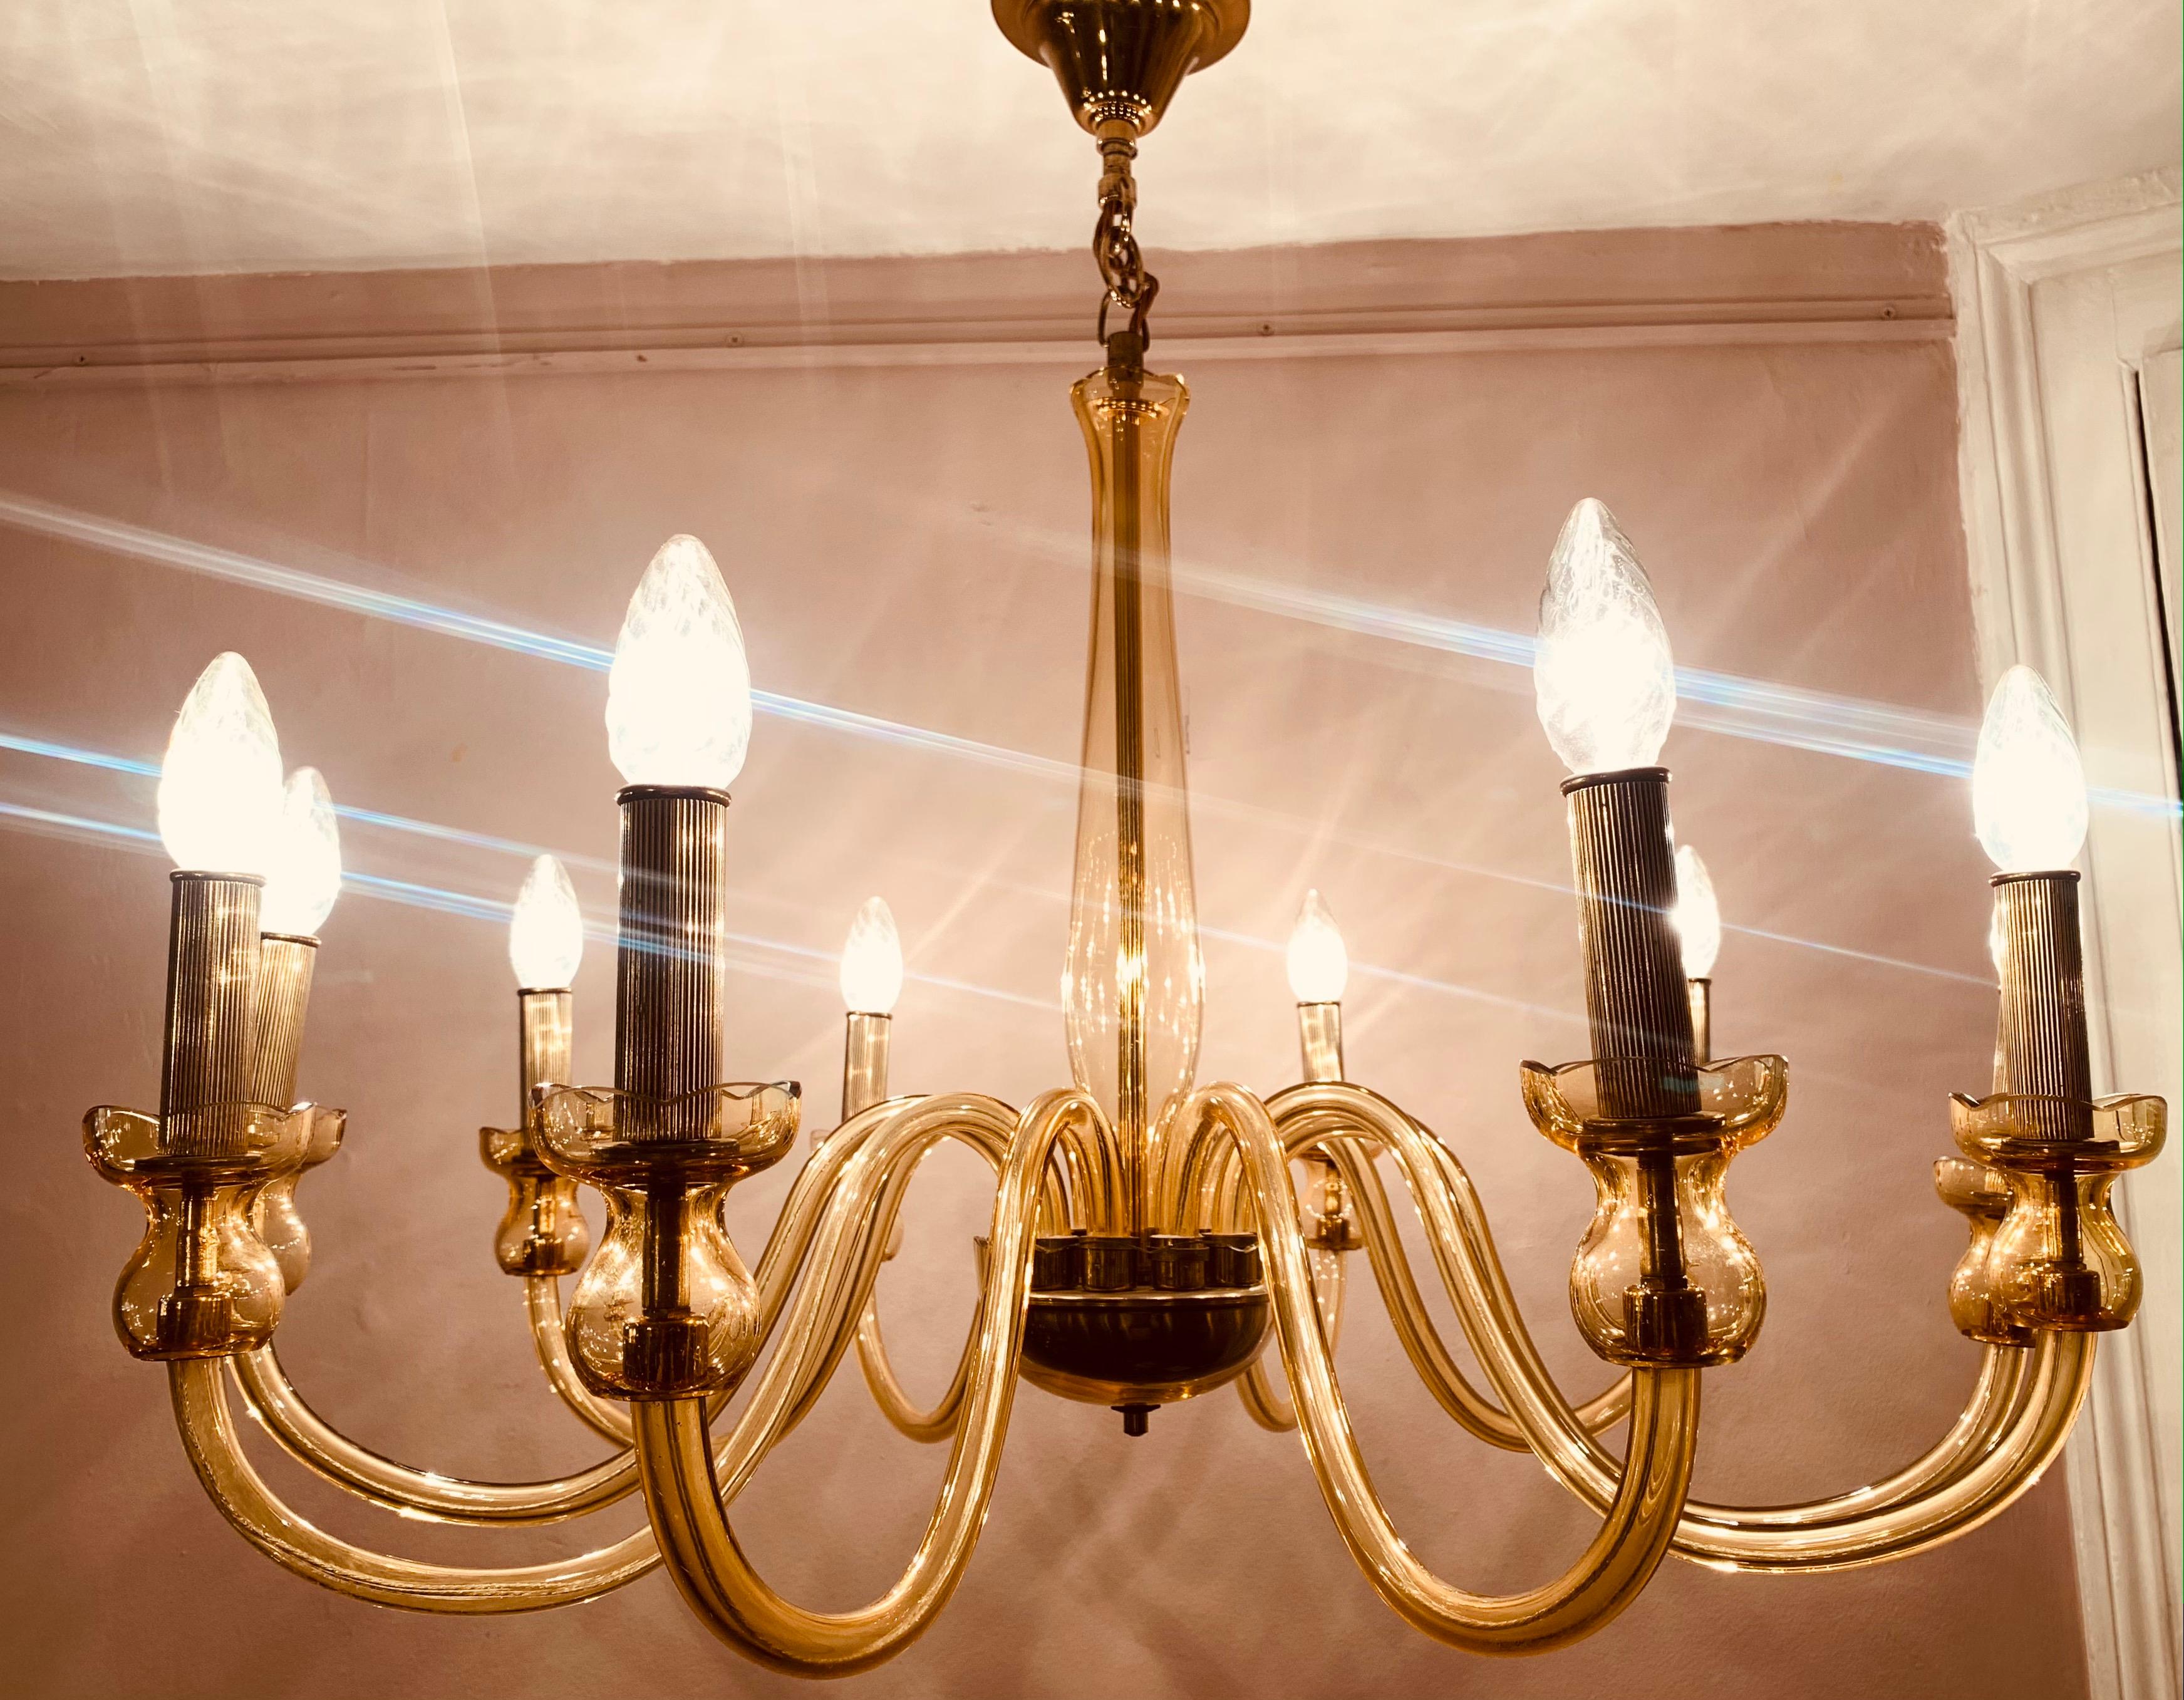 1950s 10 arm hand blown chandelier made from Bohemian crystal yellow-tinted glass with polished brass fittings. Handcrafted in the Czech Republic. The ribbed brass candle bulb holders feature indented lines running vertically. A very glamorous